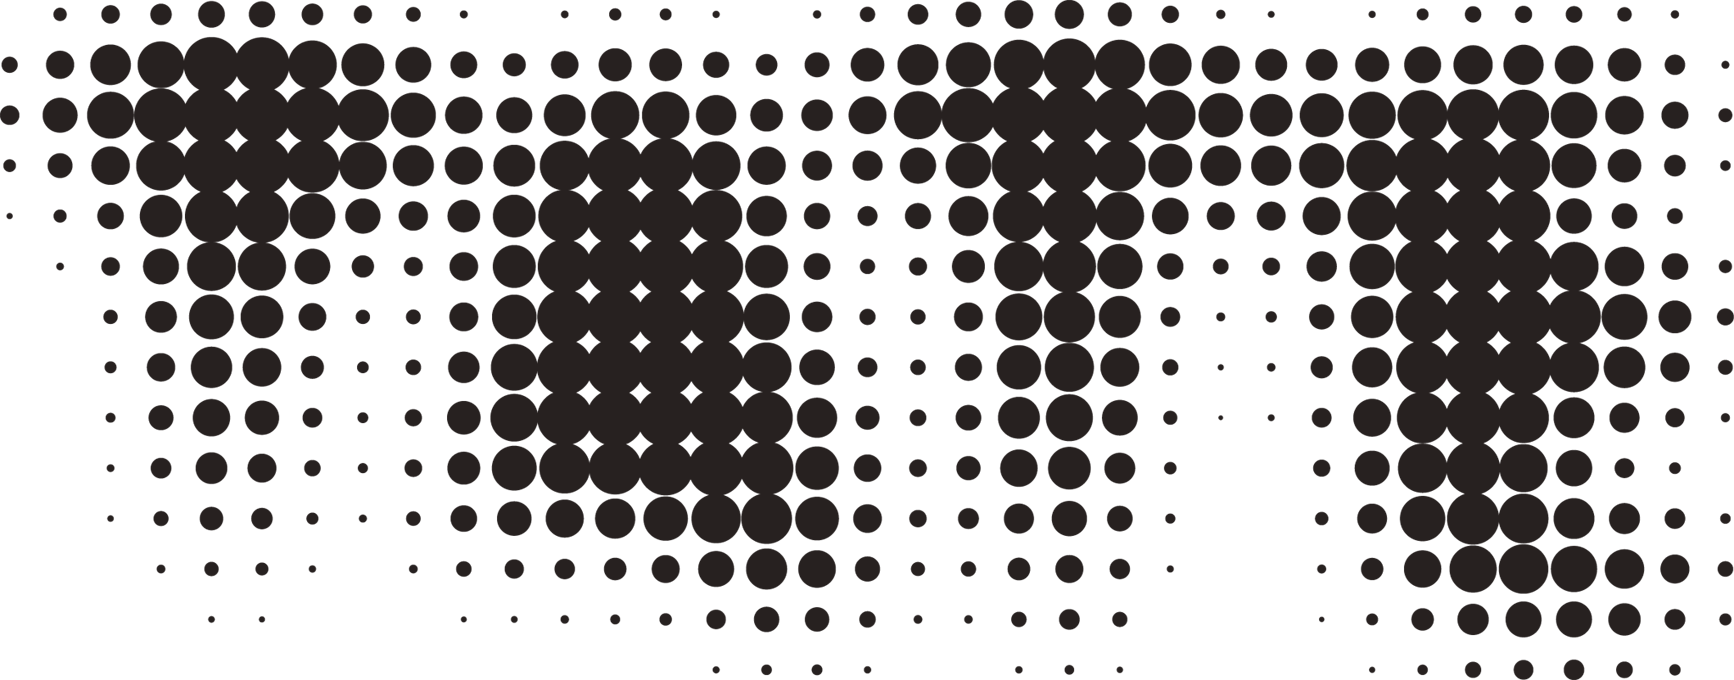 Tate logo in which each letter consists of small black circles of varying sizes.